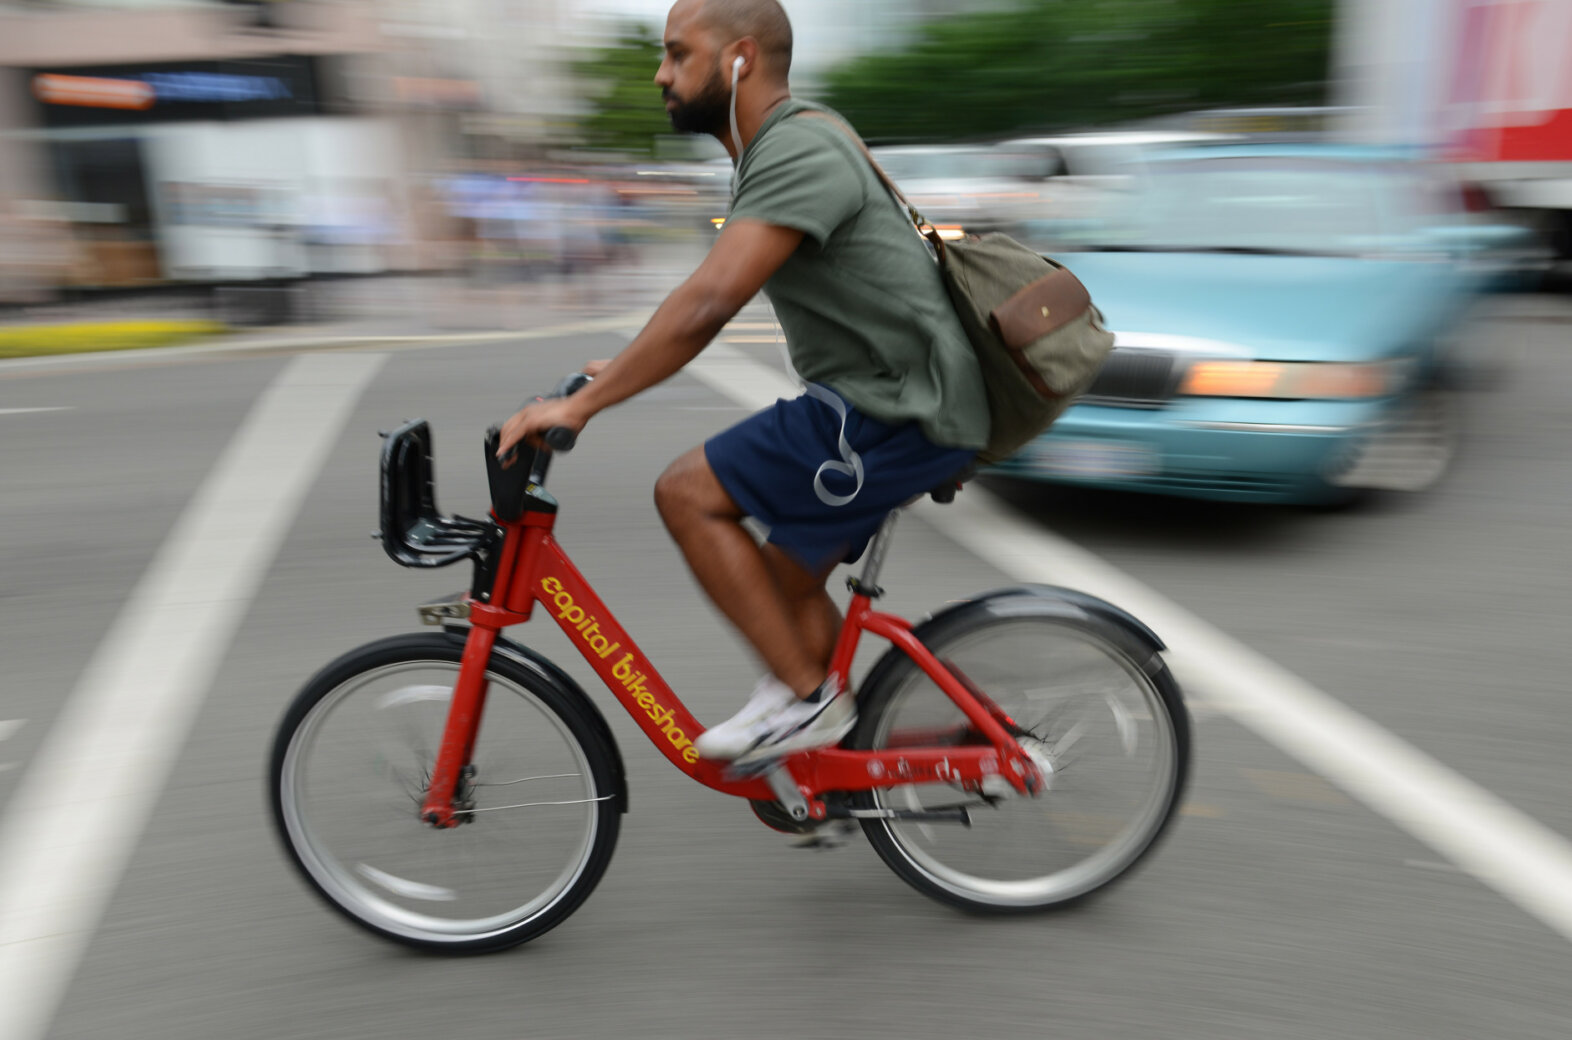 Are Uber, Lyft and Bikeshare competing for your Metro ride?